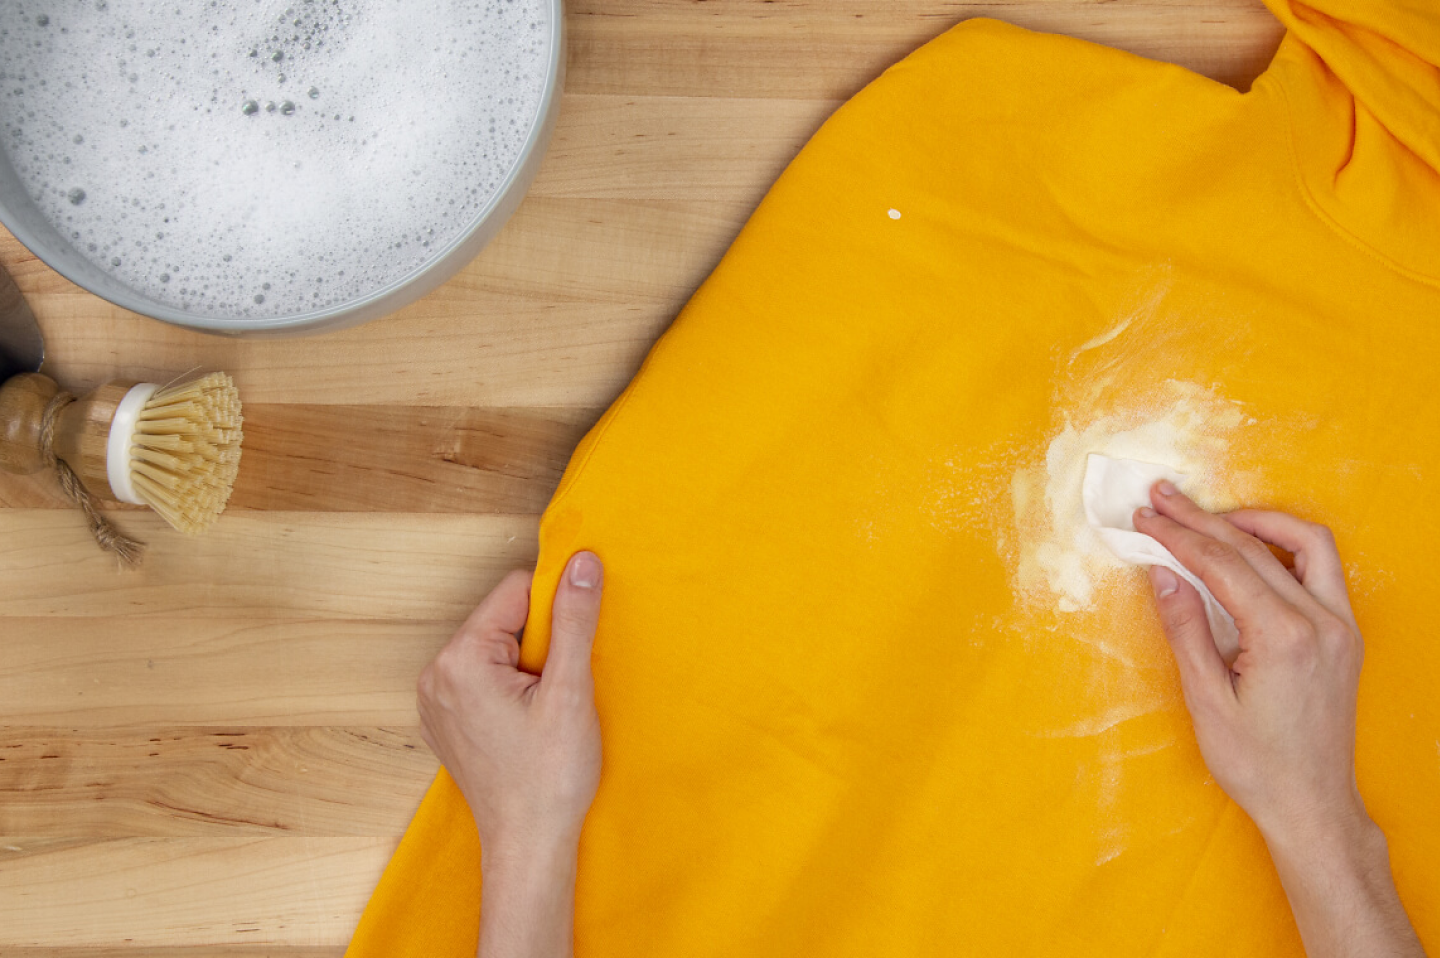 How to Get a Stain Out of a White Shirt